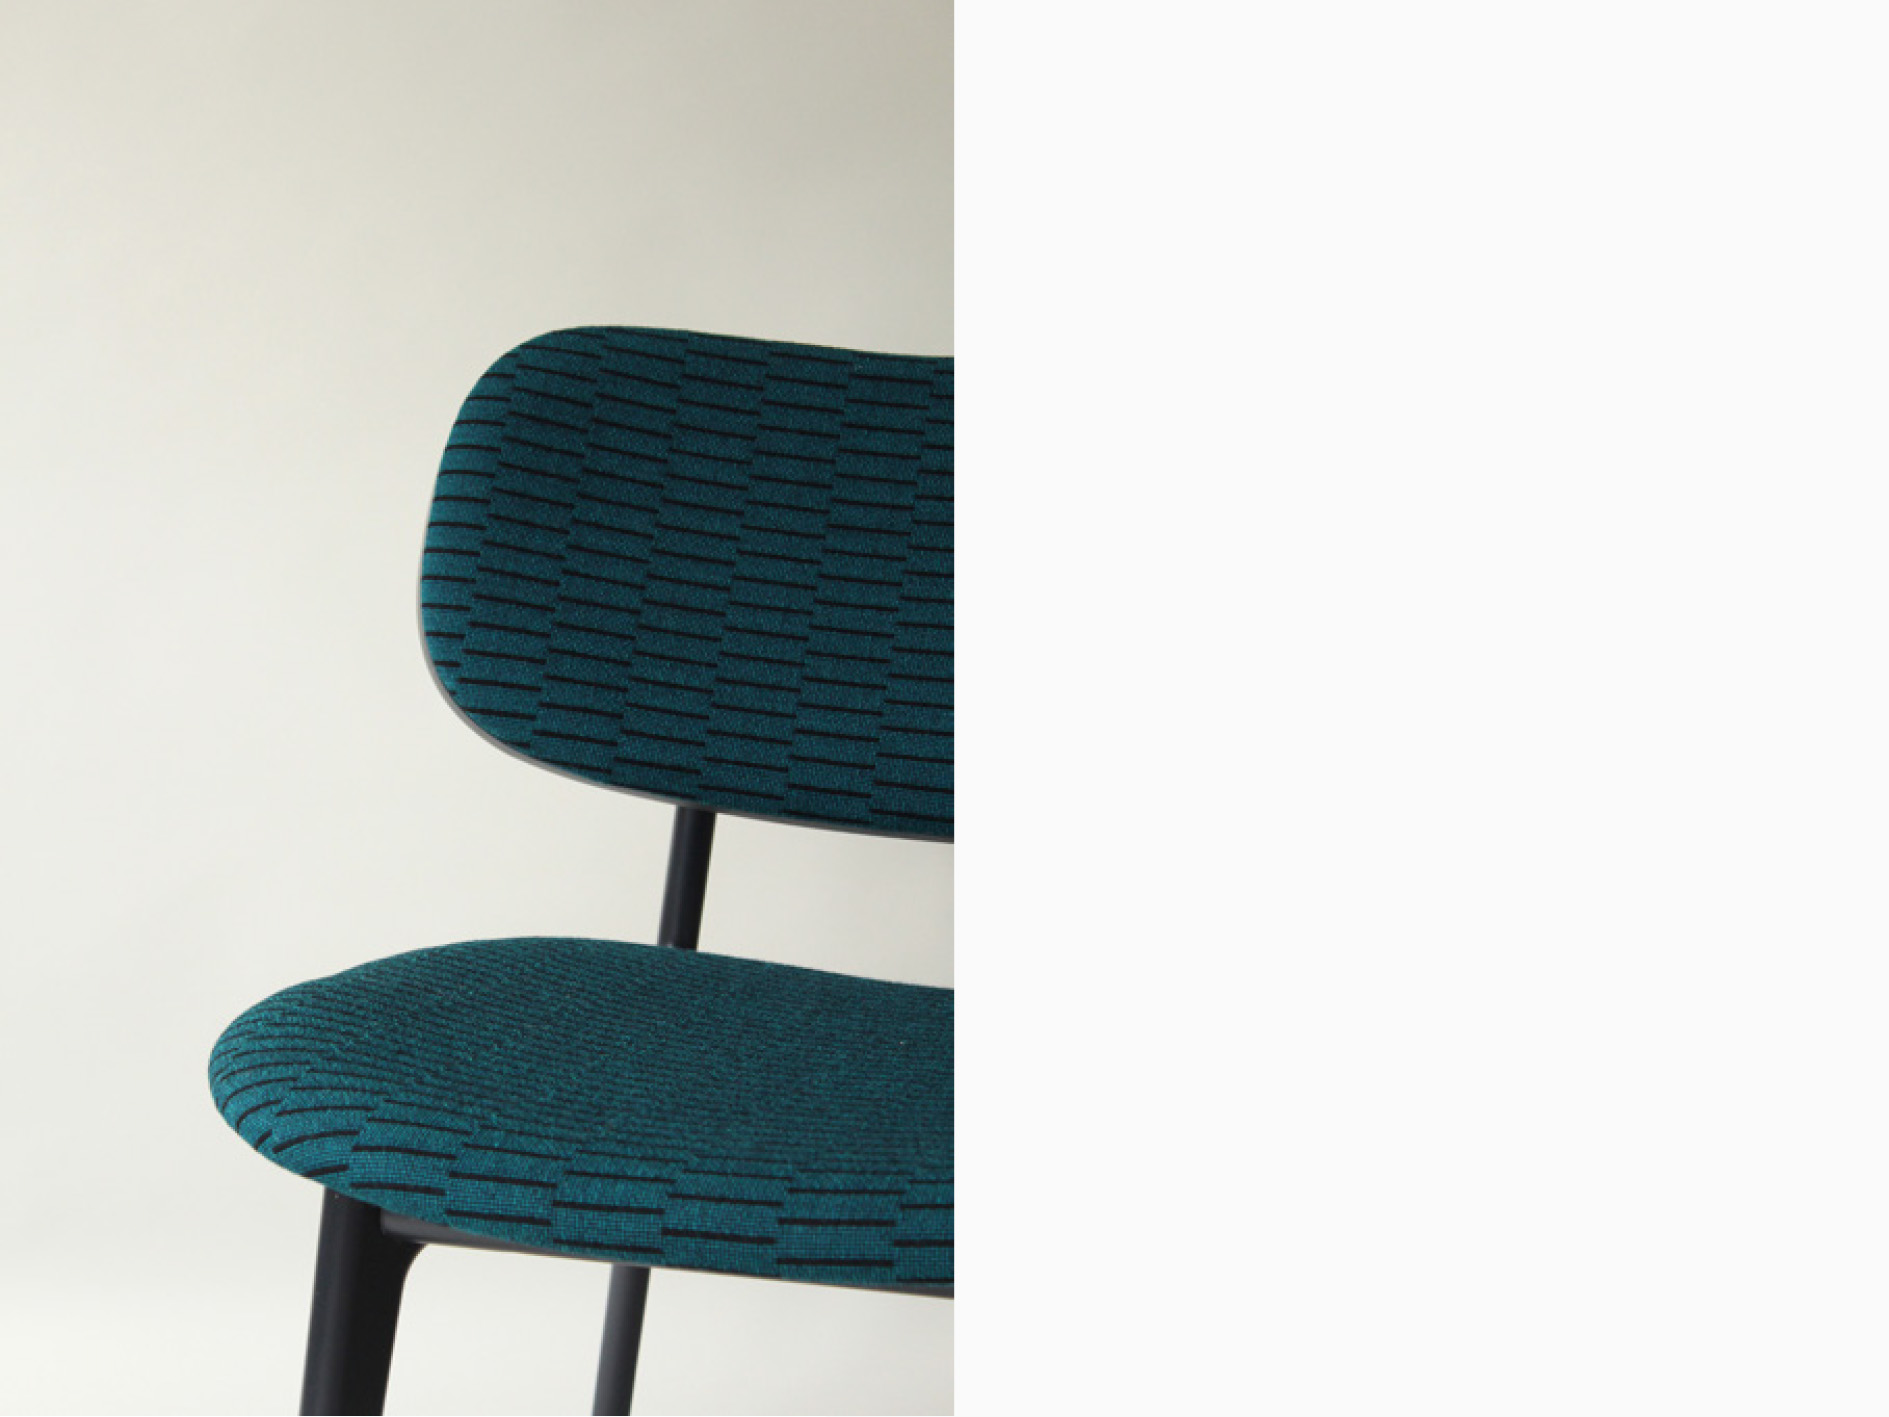 Modus_PLC_lounge_chair_by_PearsonLloyd_with_Caldbeck_fabric_by_Eleanor_Pritchard_detail.jpg